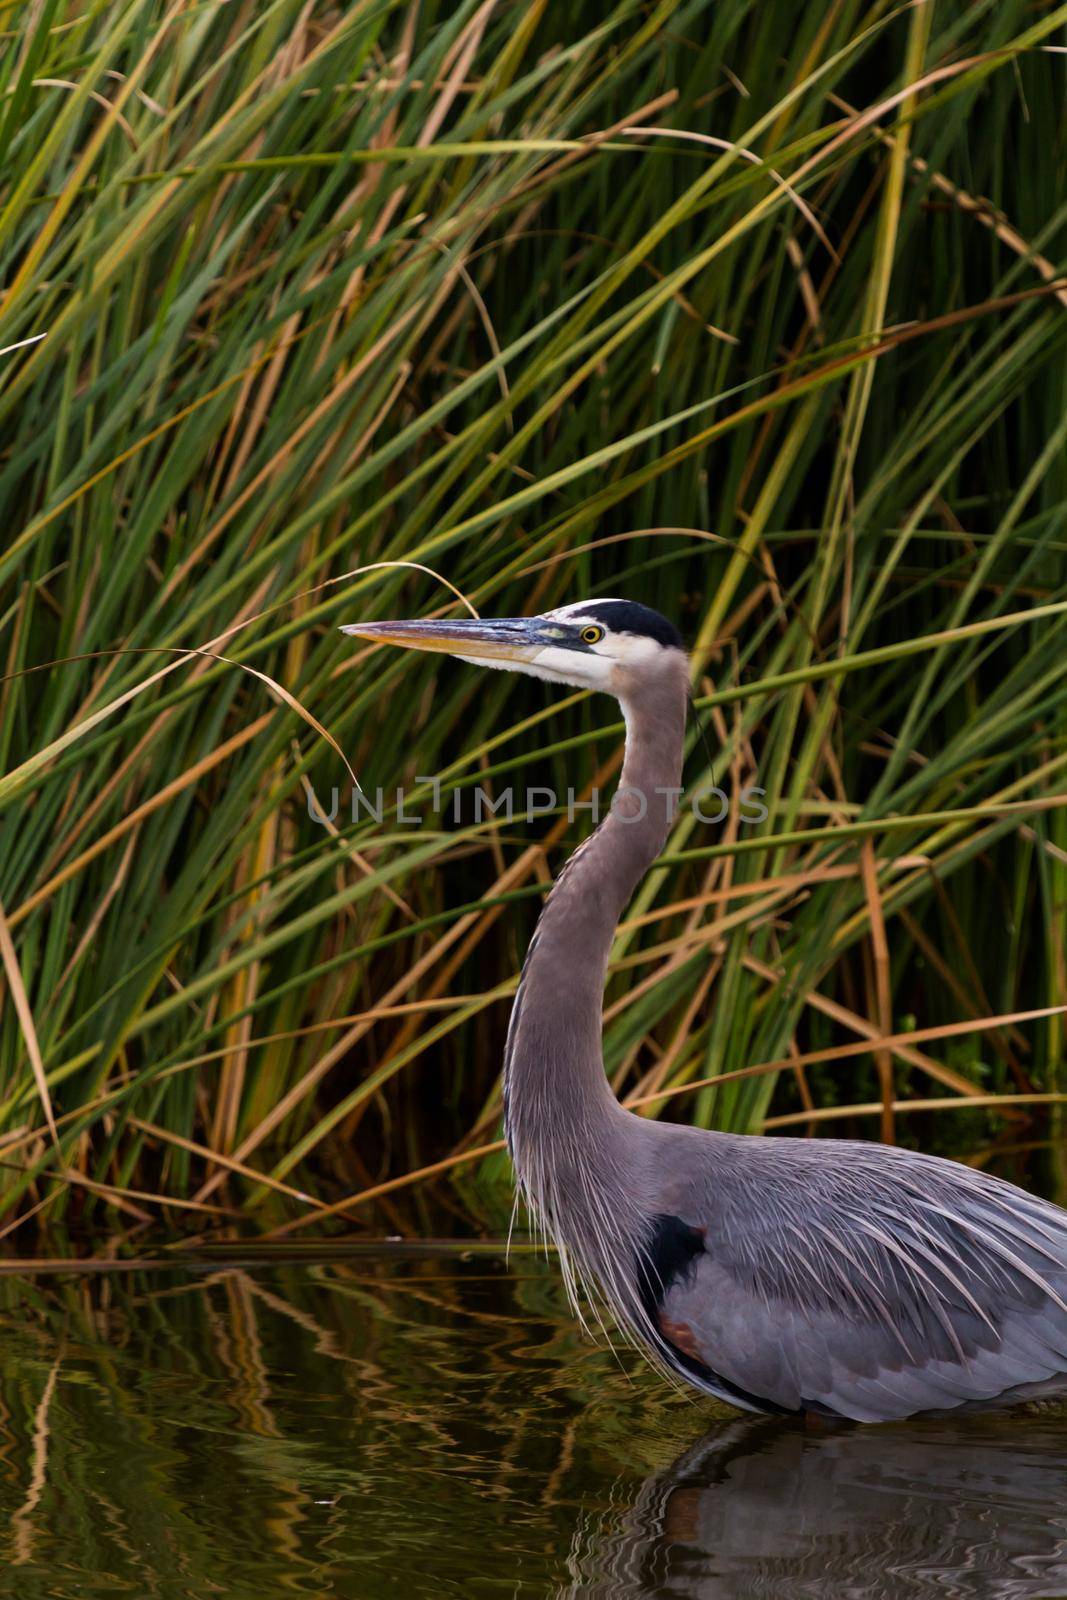 Great blue heron in natural habitat on South Padre Island, TX.